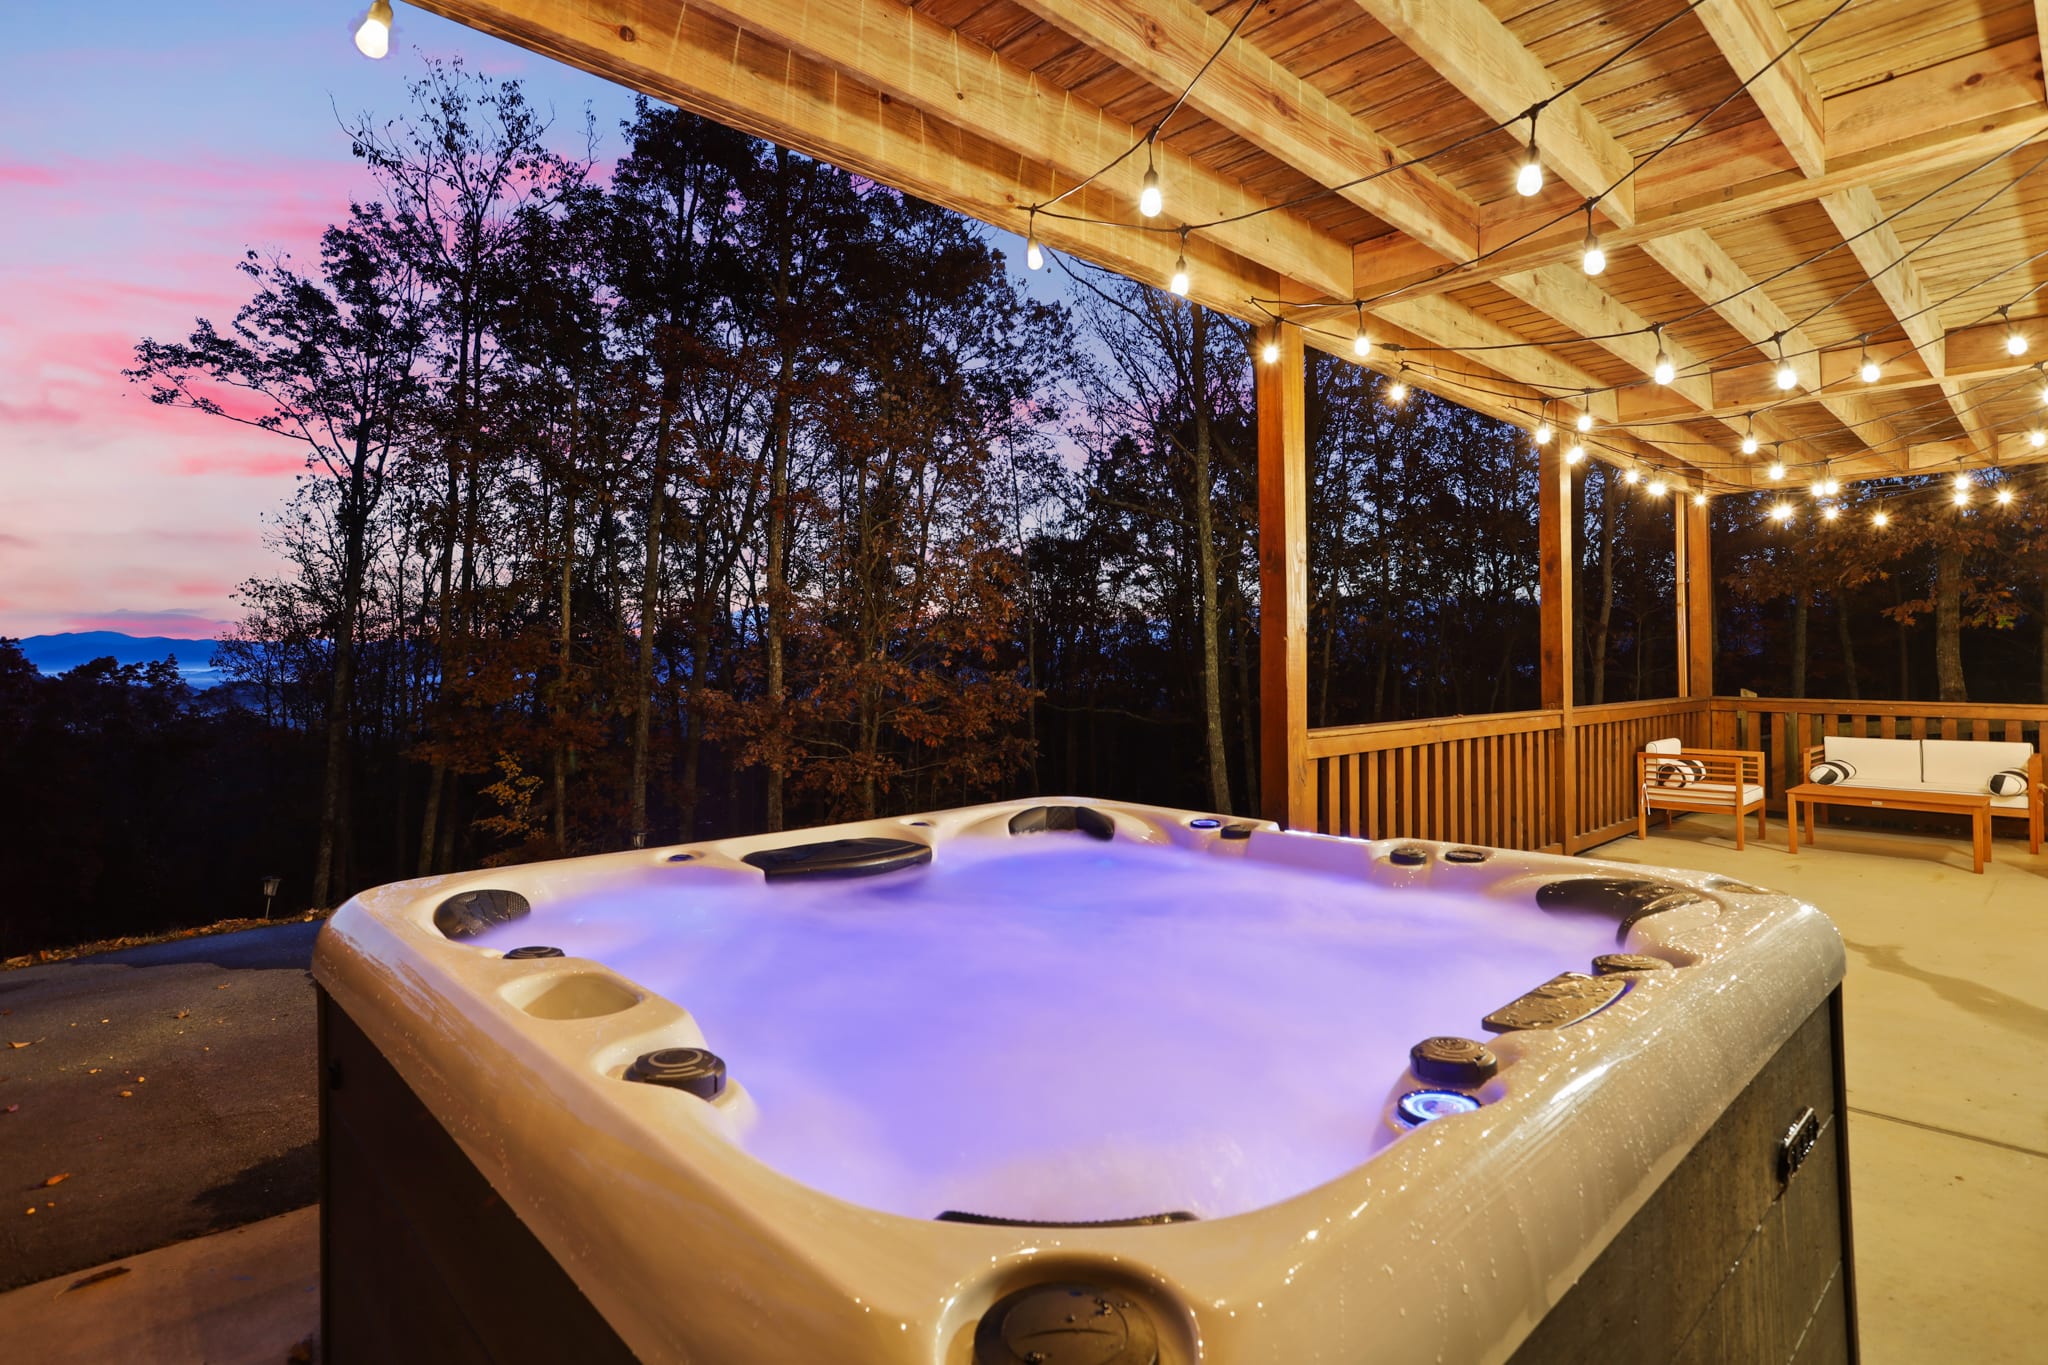 It'ss never too early for a hot tub soak! Enjoy the sunrise!